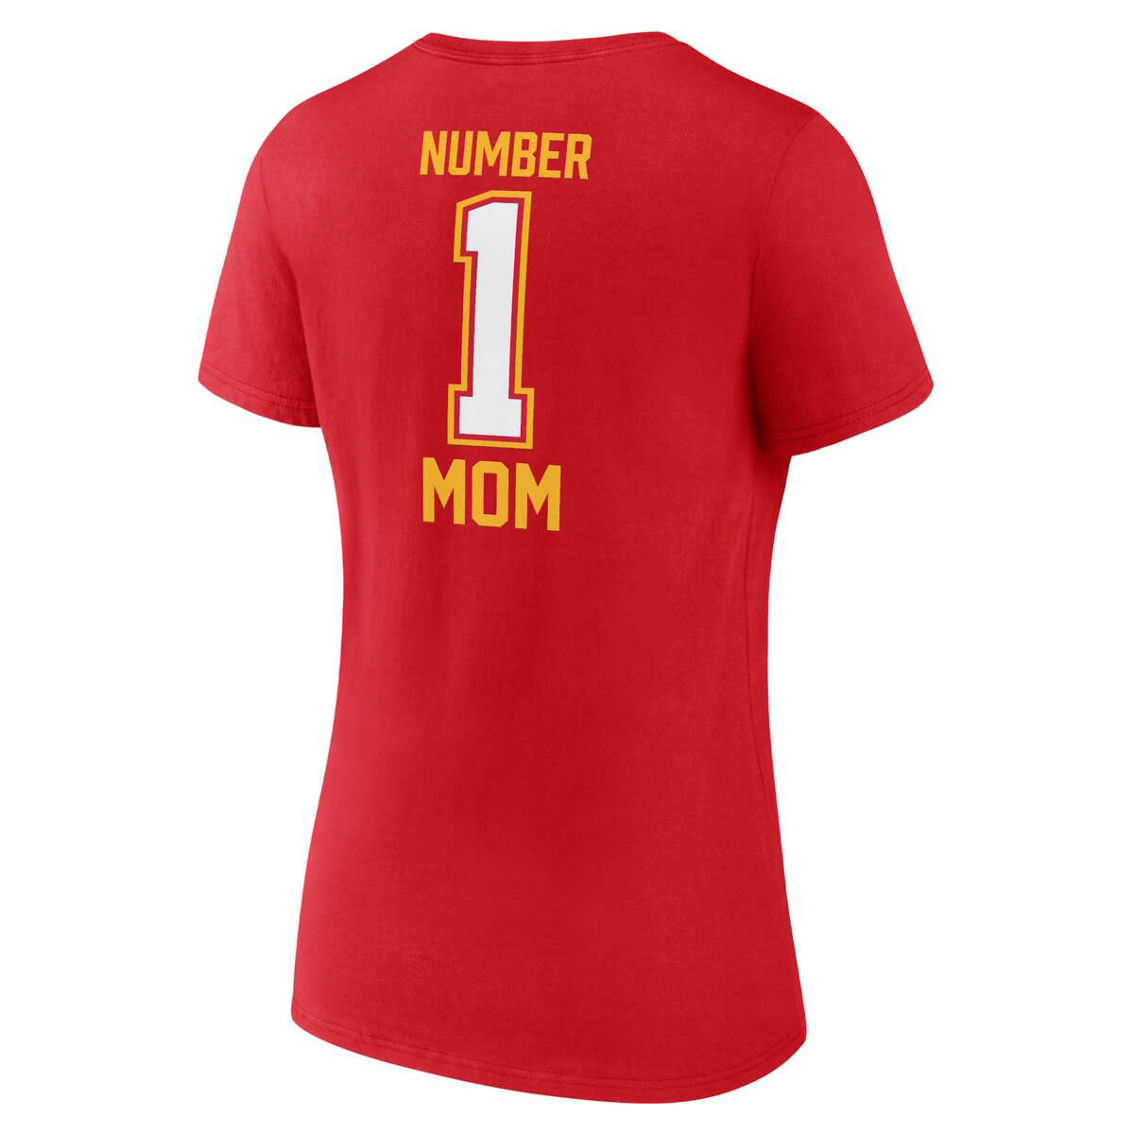 Fanatics Branded Women's Red Kansas City Chiefs Mother's Day V-Neck T-Shirt - Image 4 of 4